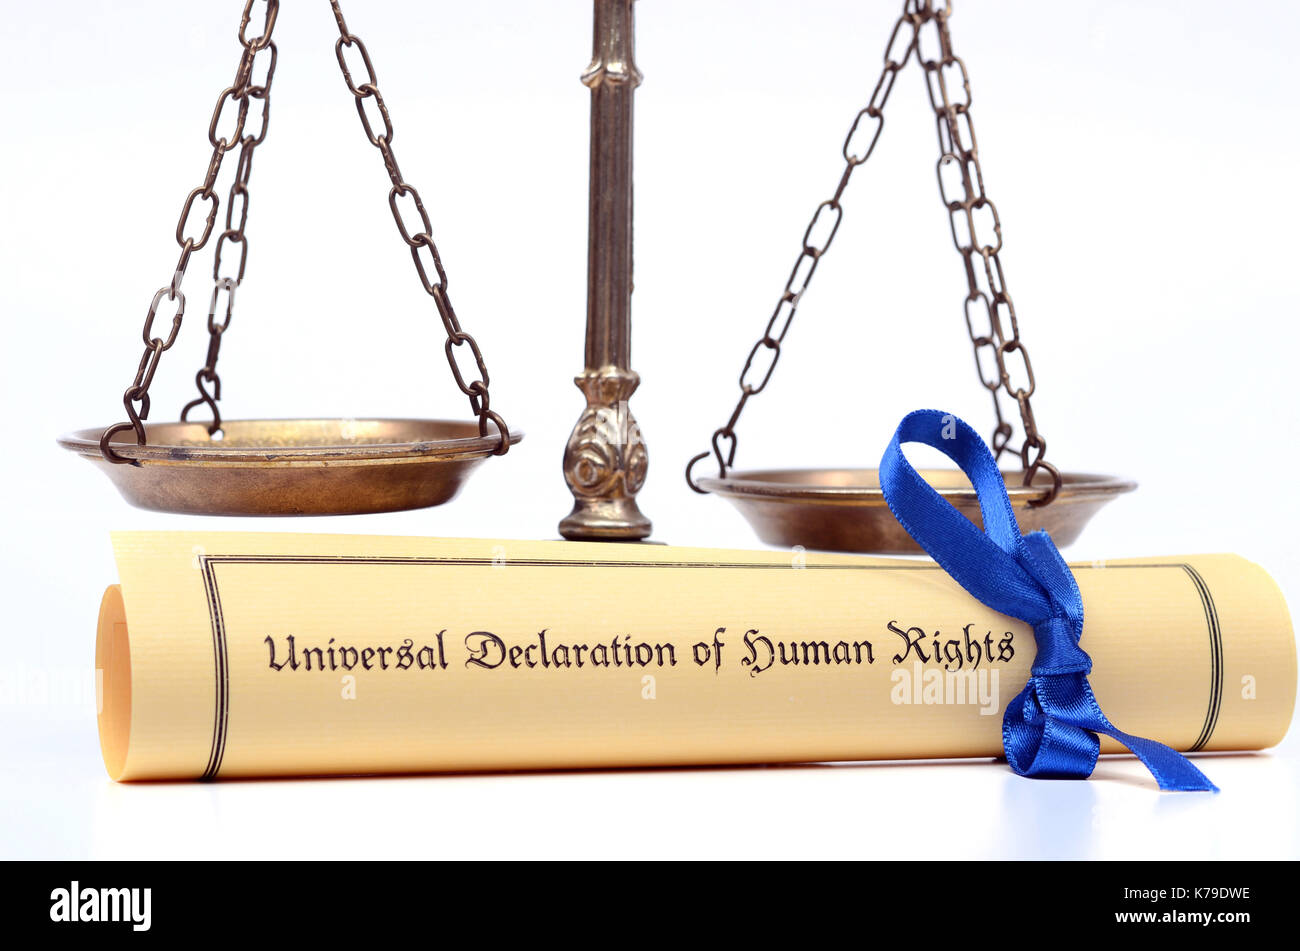 Scales of justice and The Universal Declaration of Human Rights, Human rights concept, isolated. Stock Photo